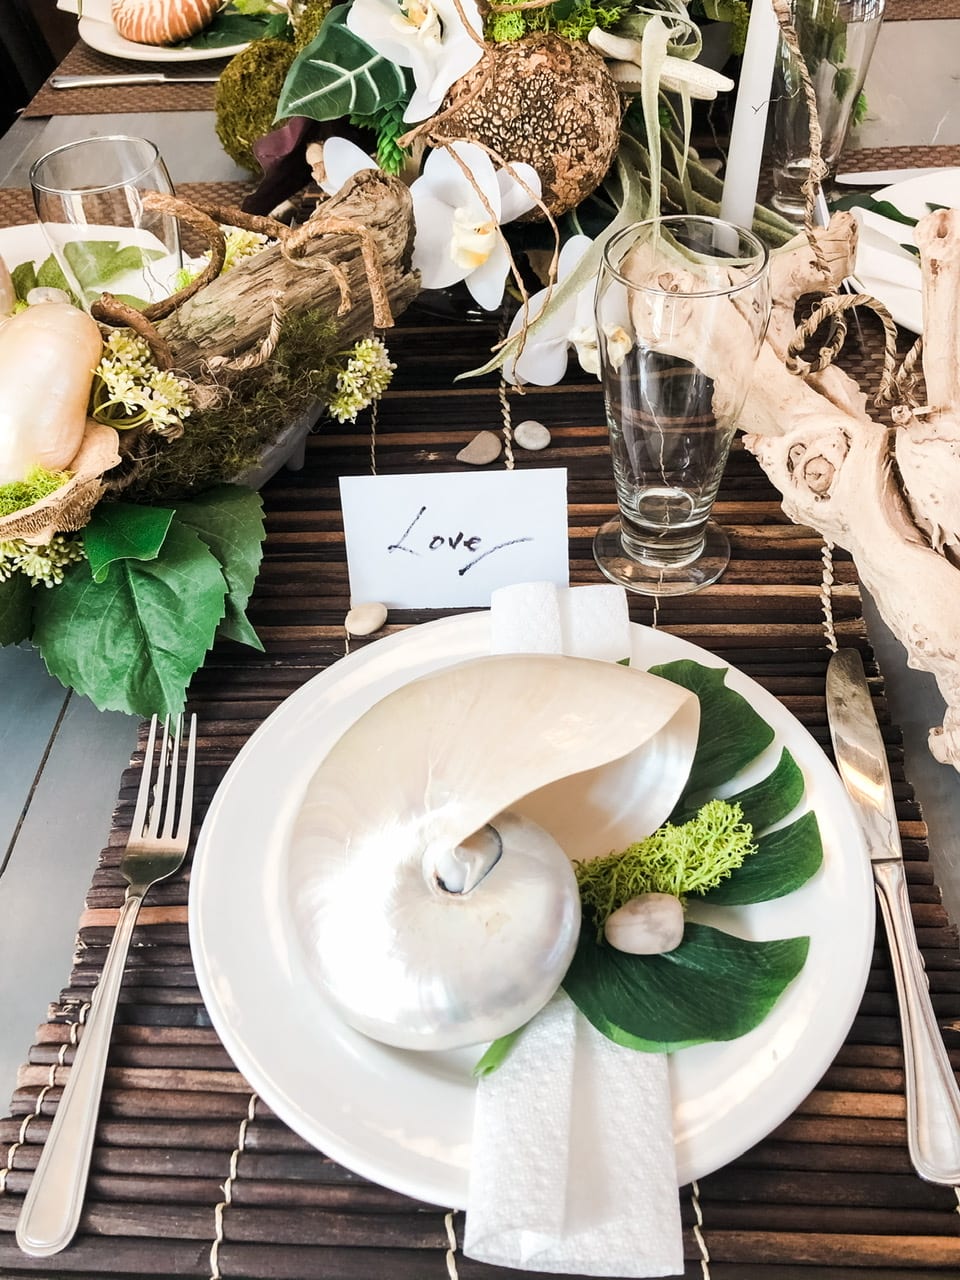 Dreamers will always Dream: A Tablescape Design Challenge amidst COVID-19